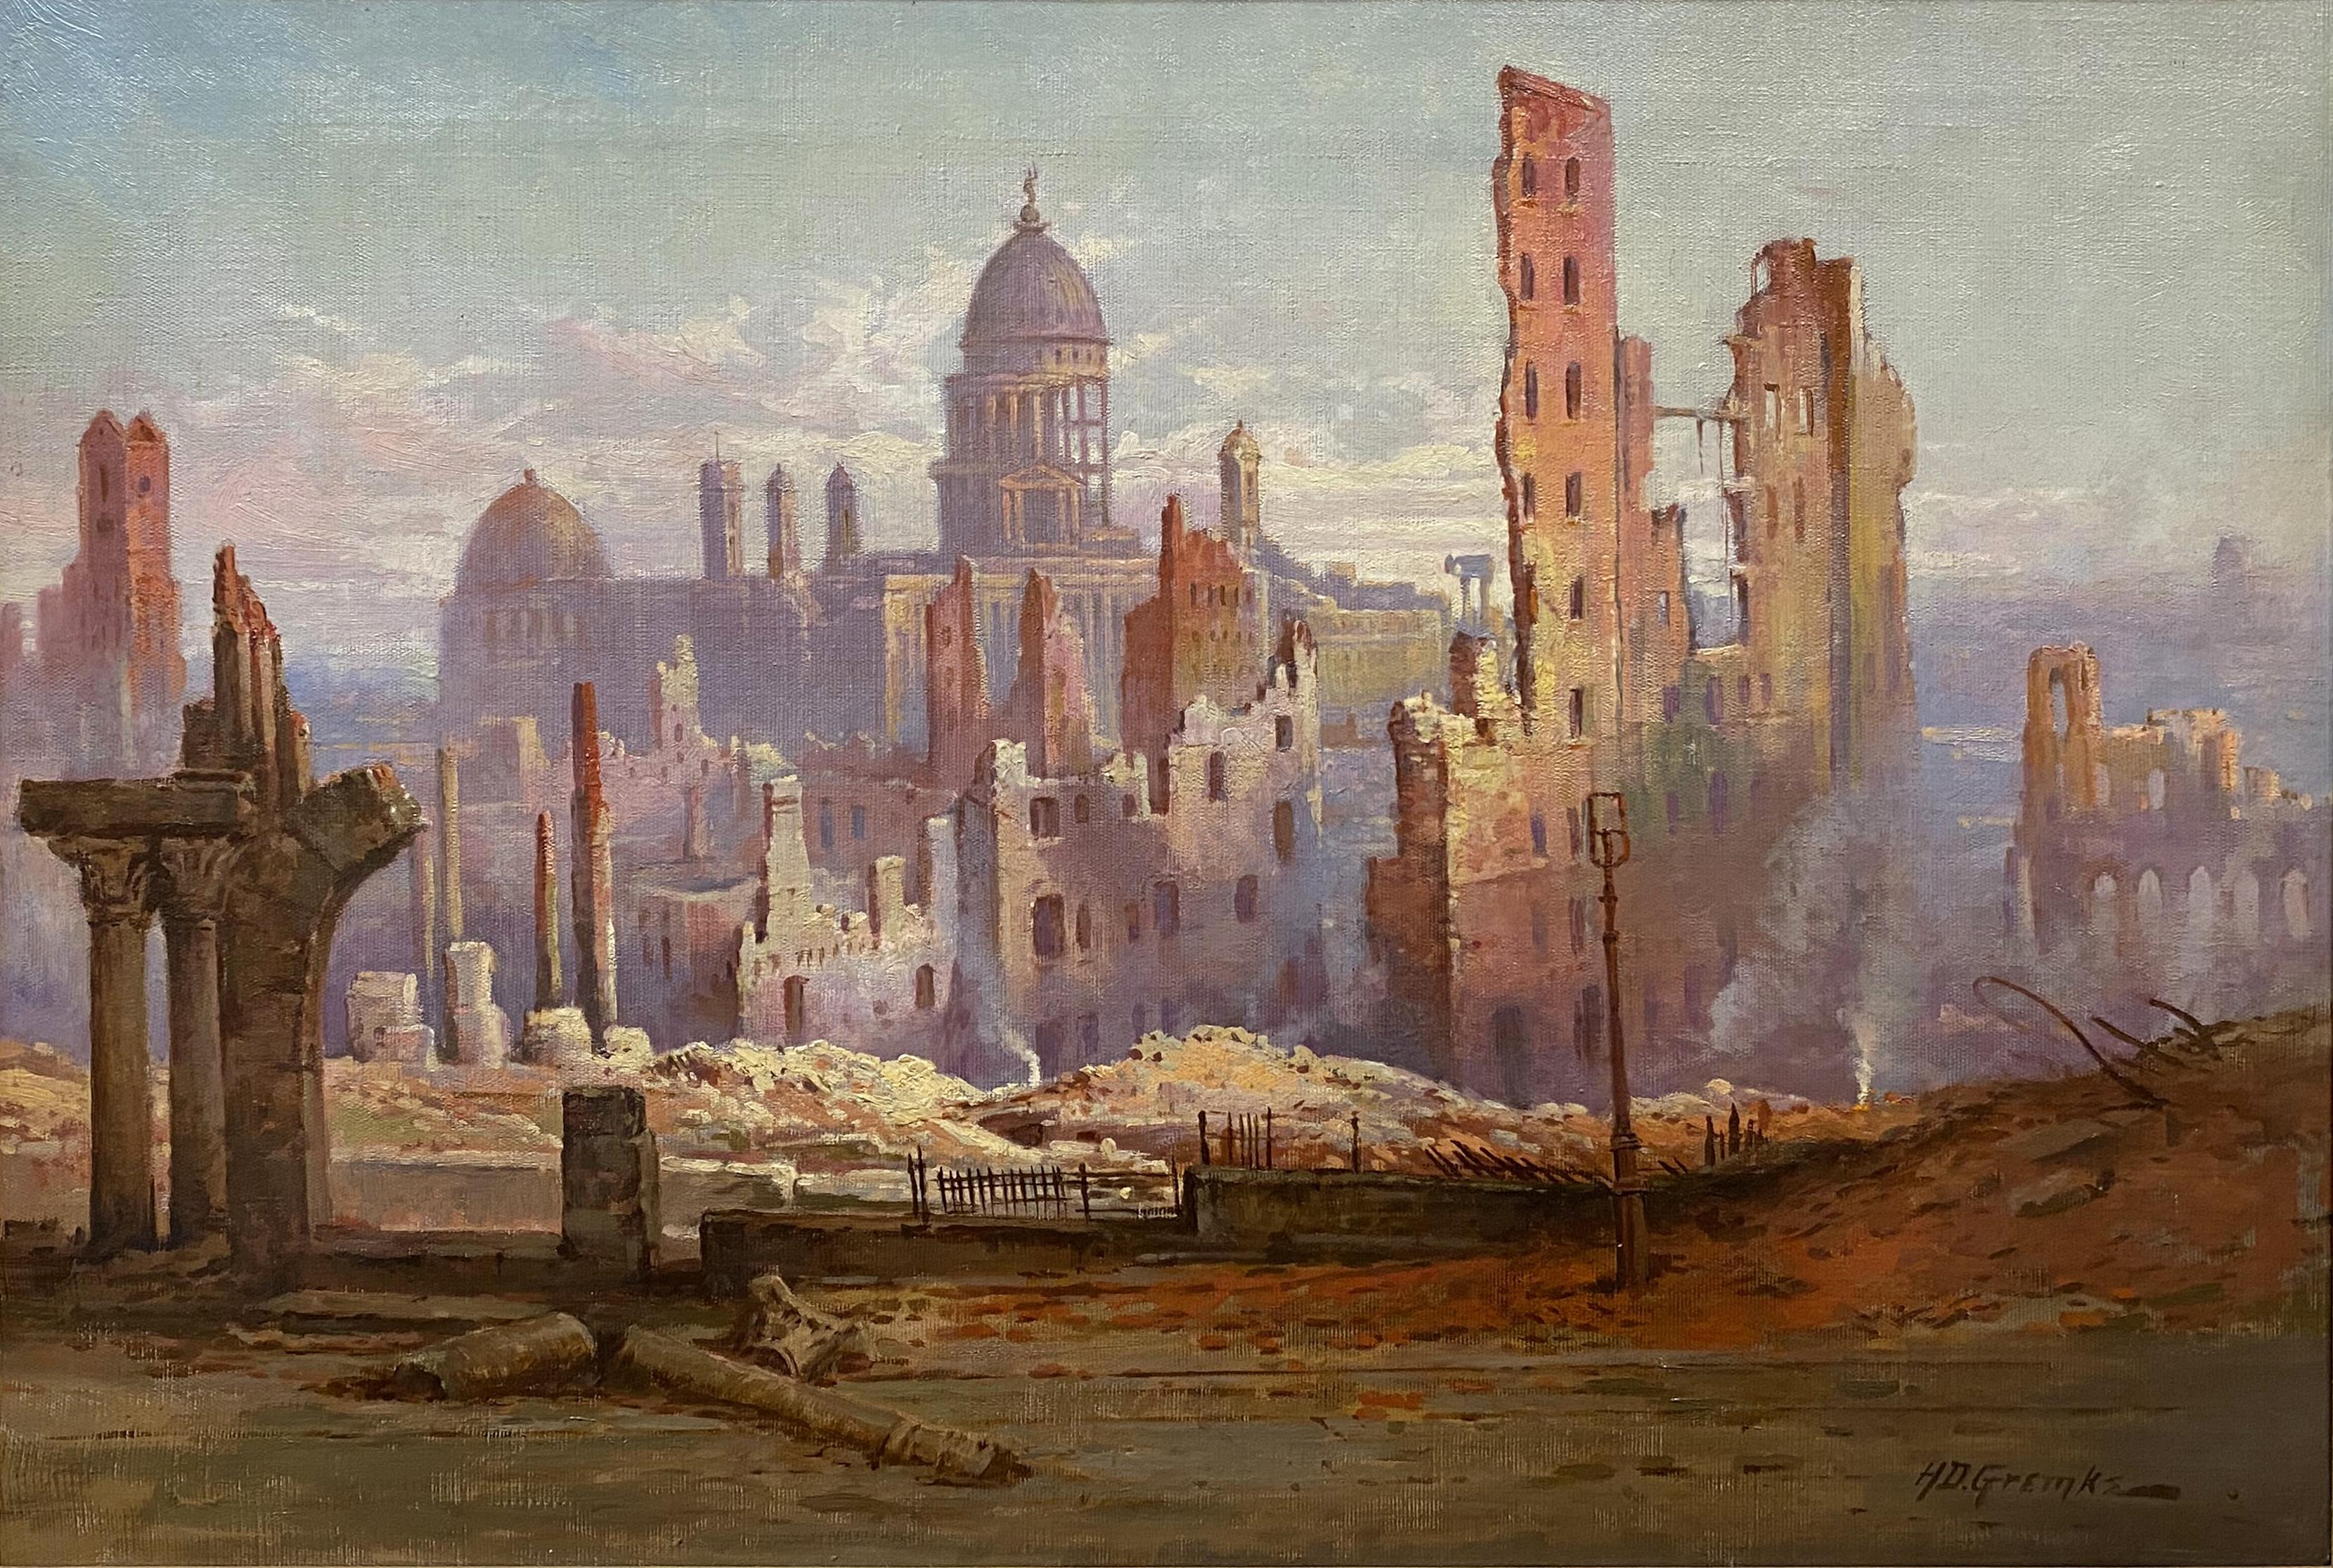  The Ruins of the San Francisco Earthquake & Fire - Painting by Henry Deidrich Gremke